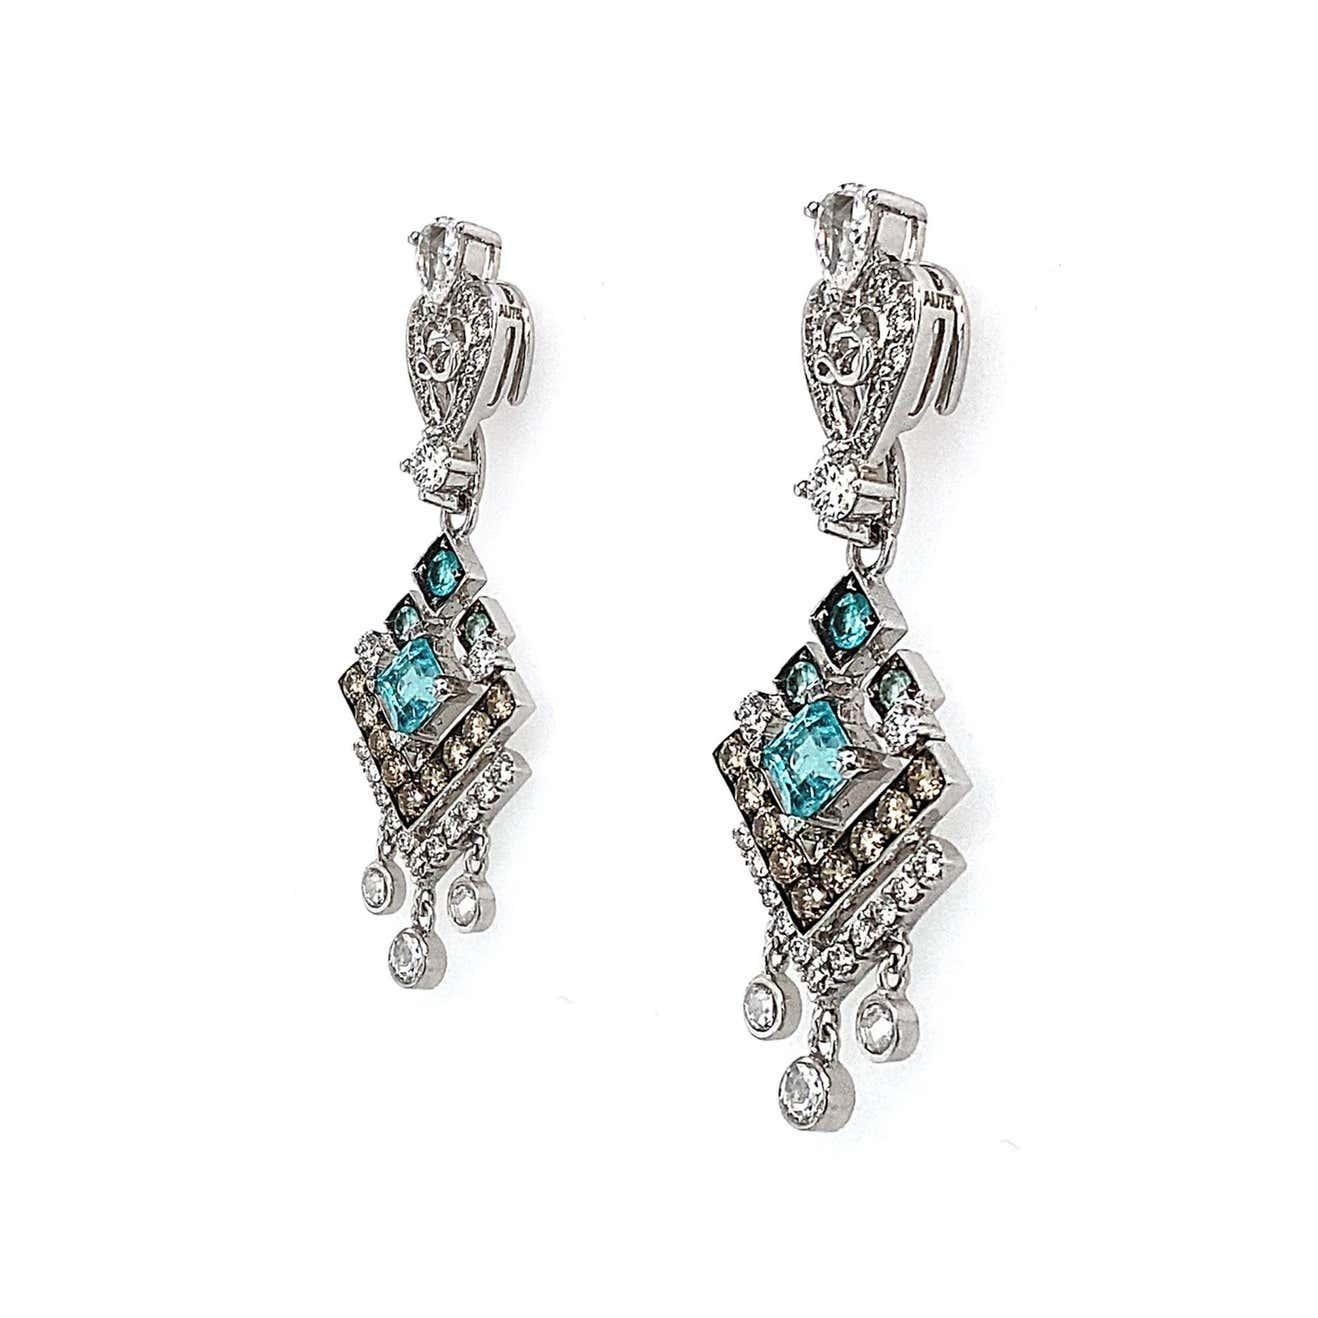 The Barocca Series is a celebration of elegance and romance. As part of Dilys’ Novel Collection, the design of these stunning earrings is influenced by the Portuguese colonial architecture in the birth place of Paraiba Tourmalines, Brazil. The 8